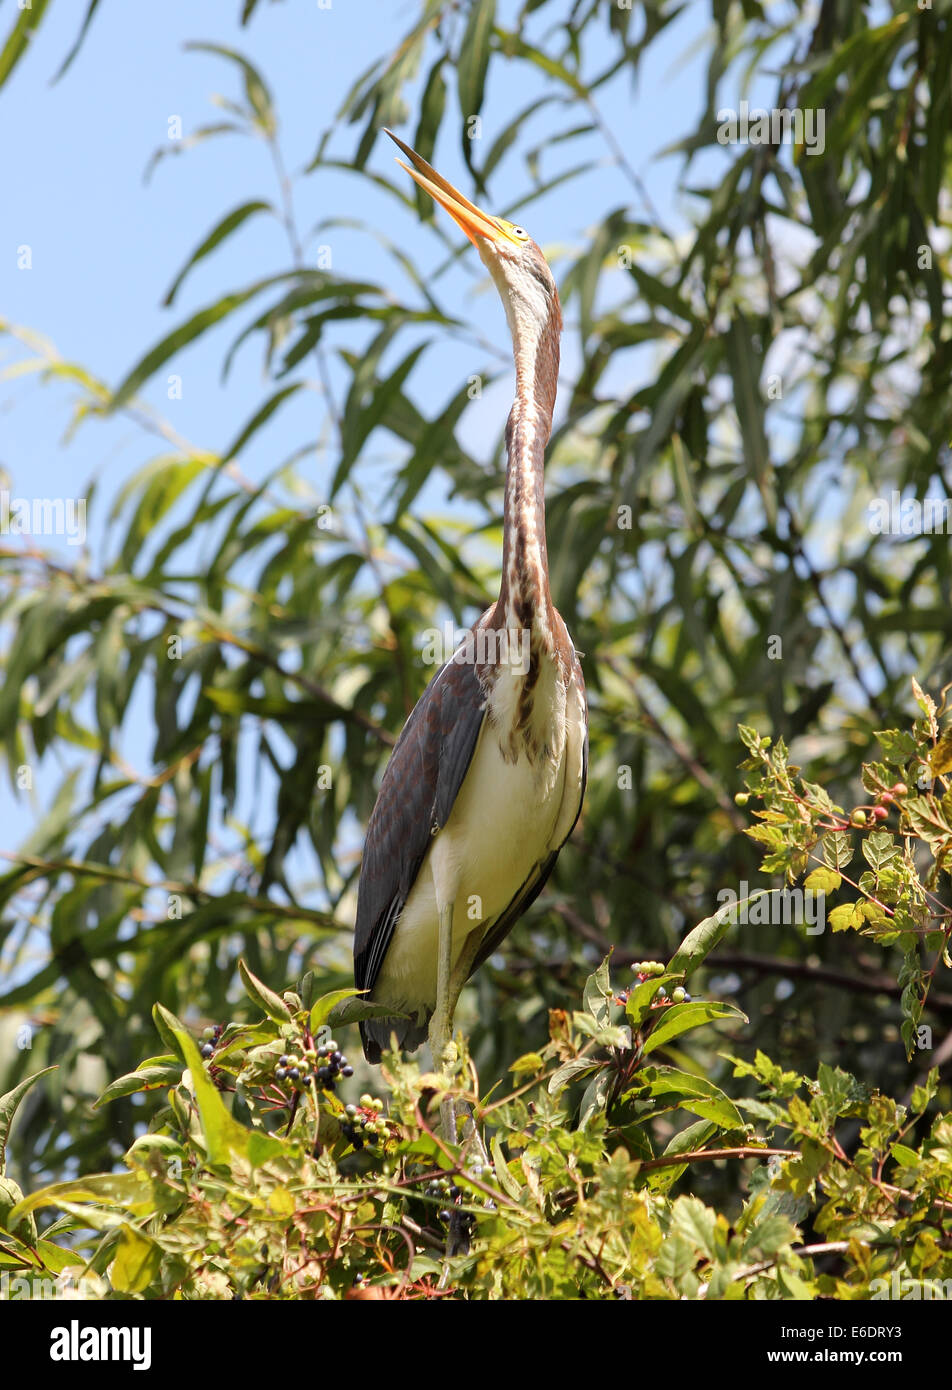 A young Tricolored heron perches in a nesting tree.Head looking up. Stock Photo